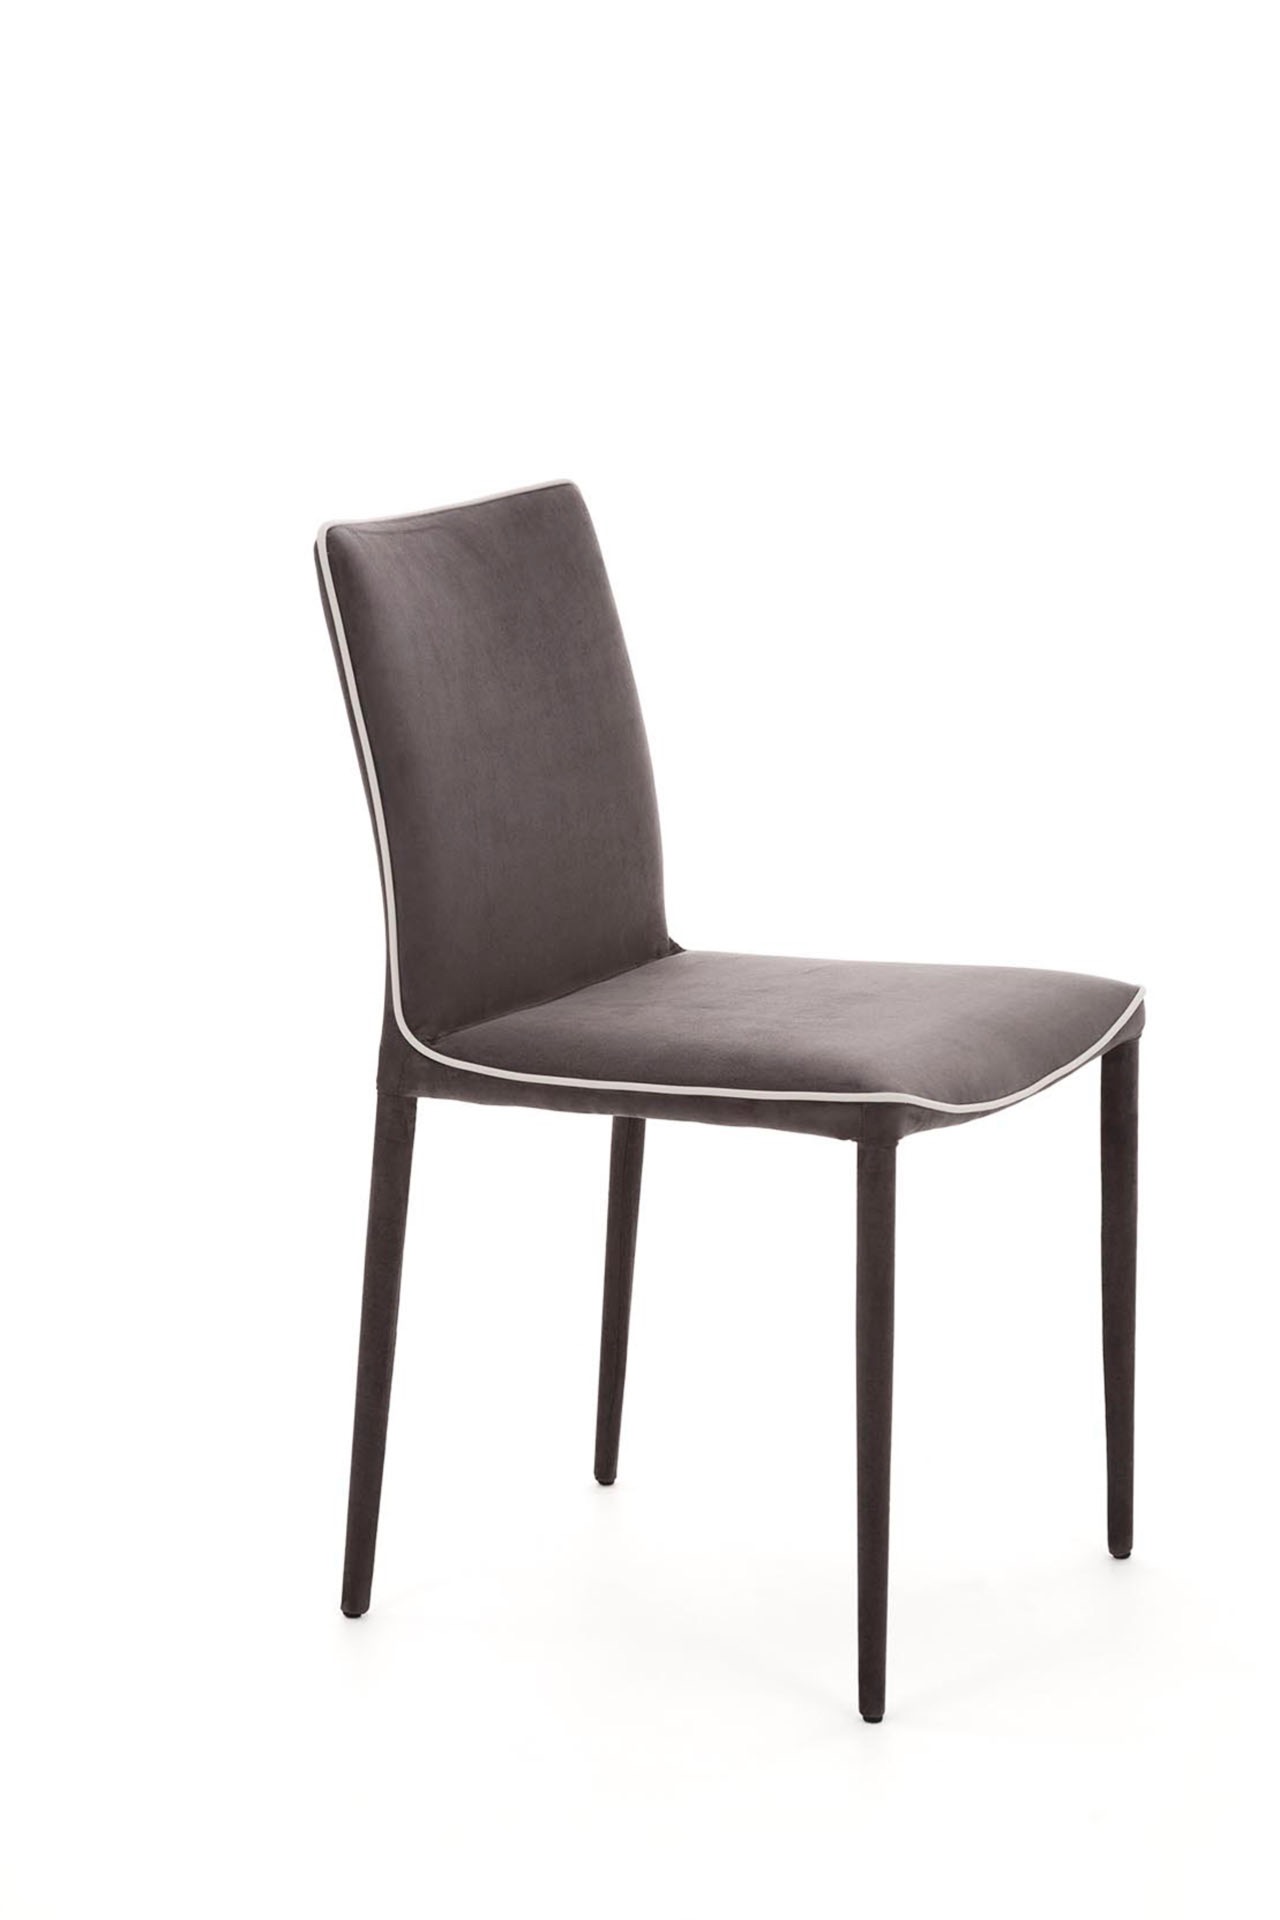 Natalie Dining Chairs